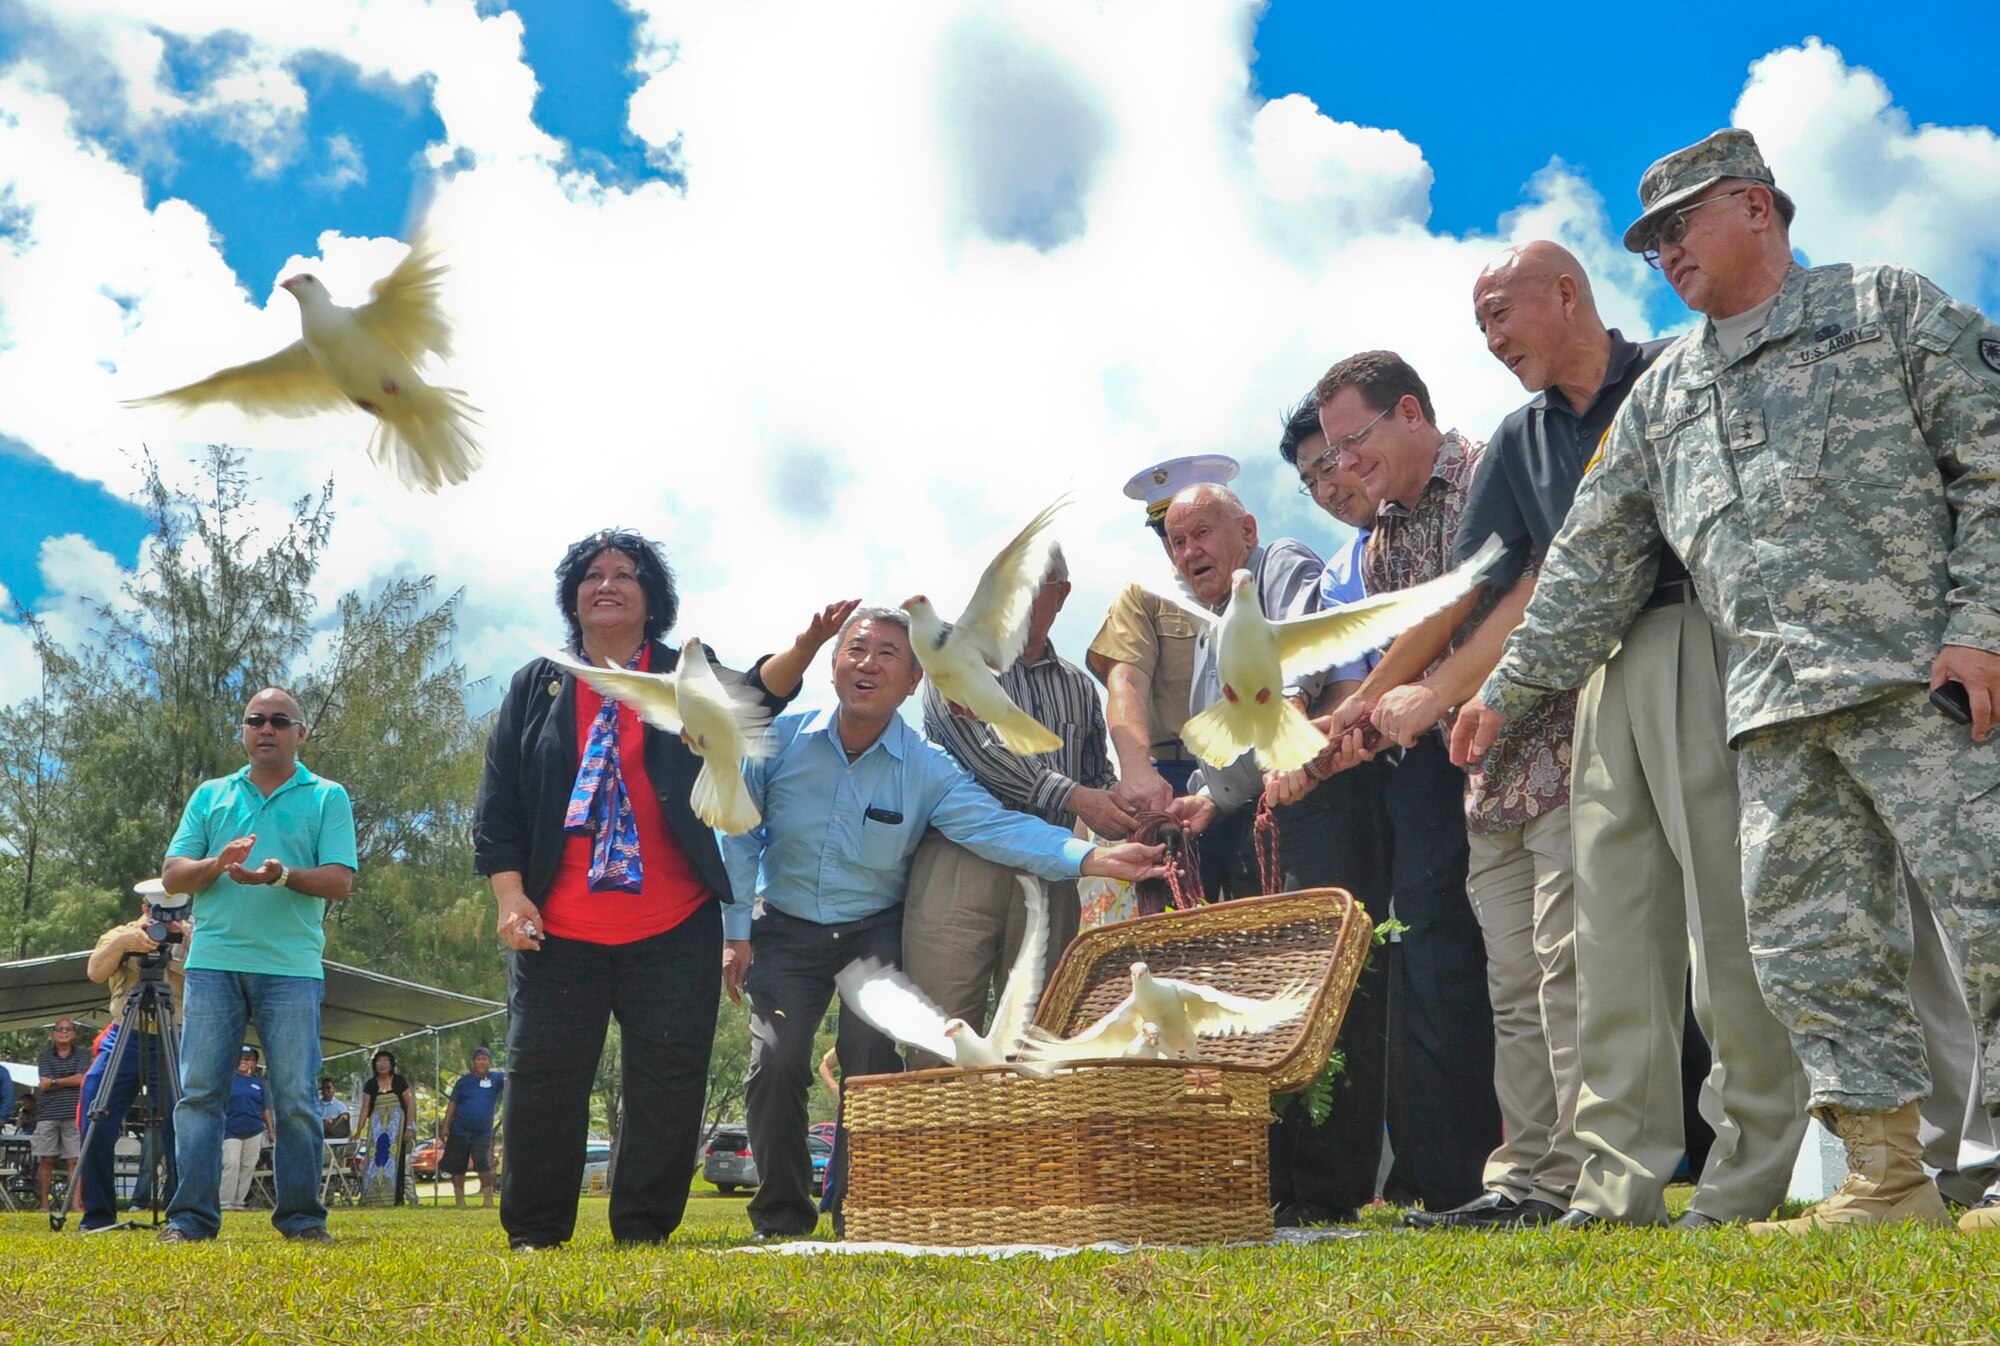 ASAN, Guam -- Joint Region Marianas military leaders and Guam dignitaries release birds to signify freedom during a memorial ceremony in Asan, Guam, July 18, 2013. The memorial ceremony recognized the sacrifices made by U.S. service members and local citizens during the liberation of Guam from Japanese forces in 1944. (U.S. Air Force photo by Airman 1st Class Adarius Petty/Released)